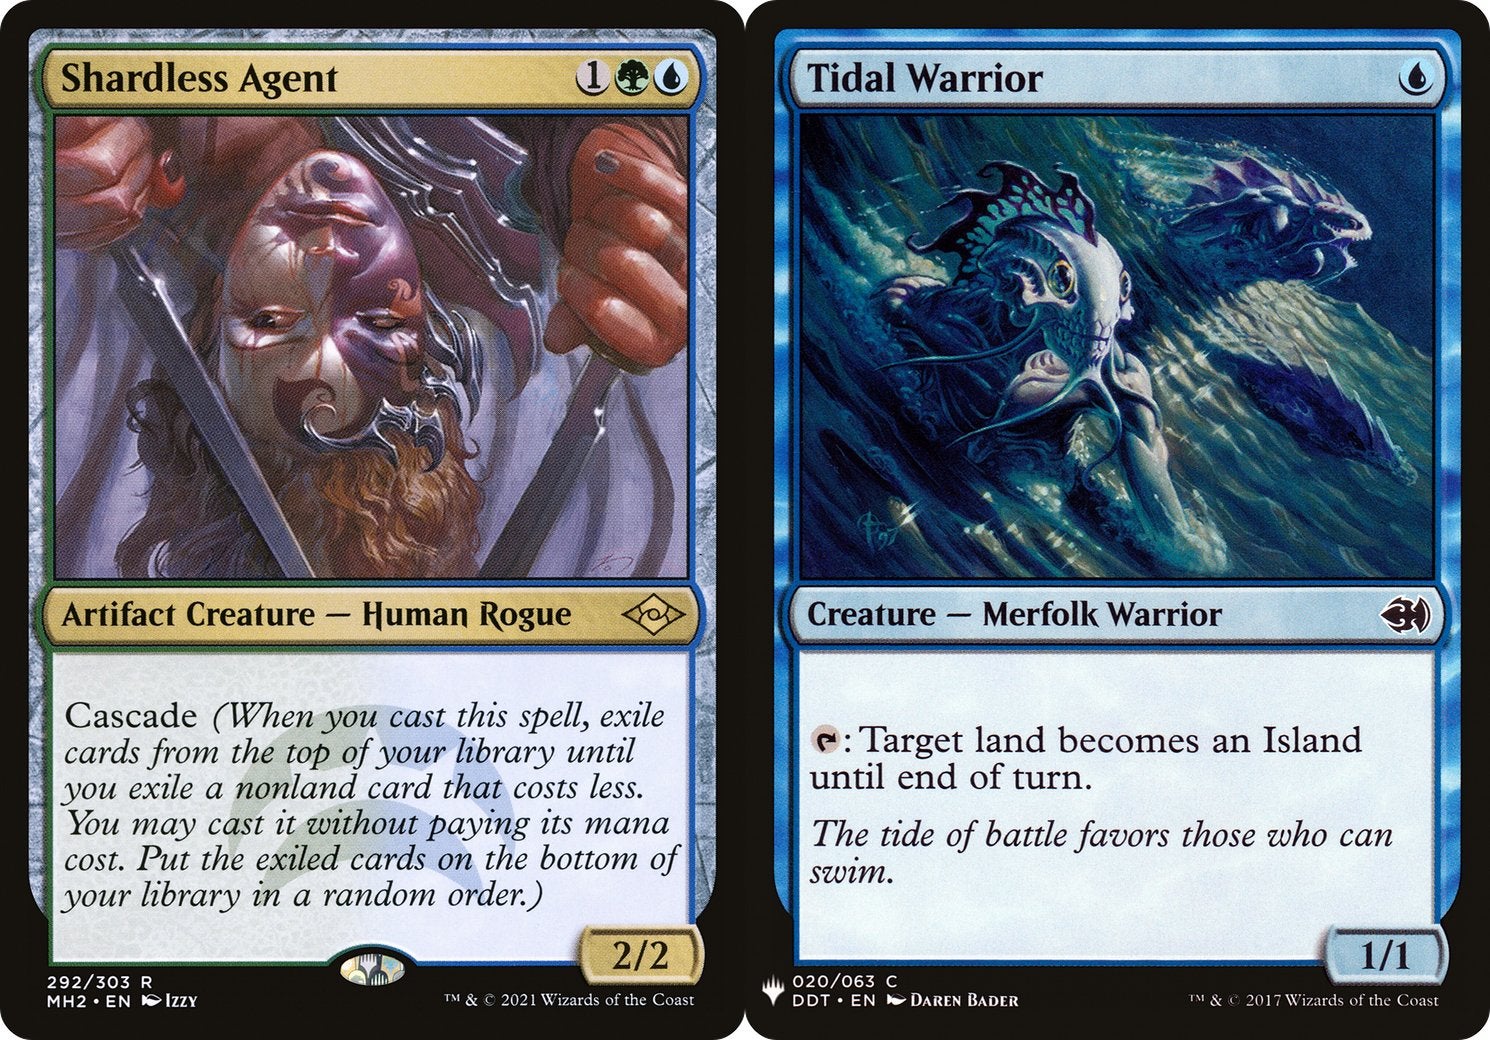 Two cards from MTG: one has the Cascade ability and the other does not but the latter costs less mana than the one with Cascade.